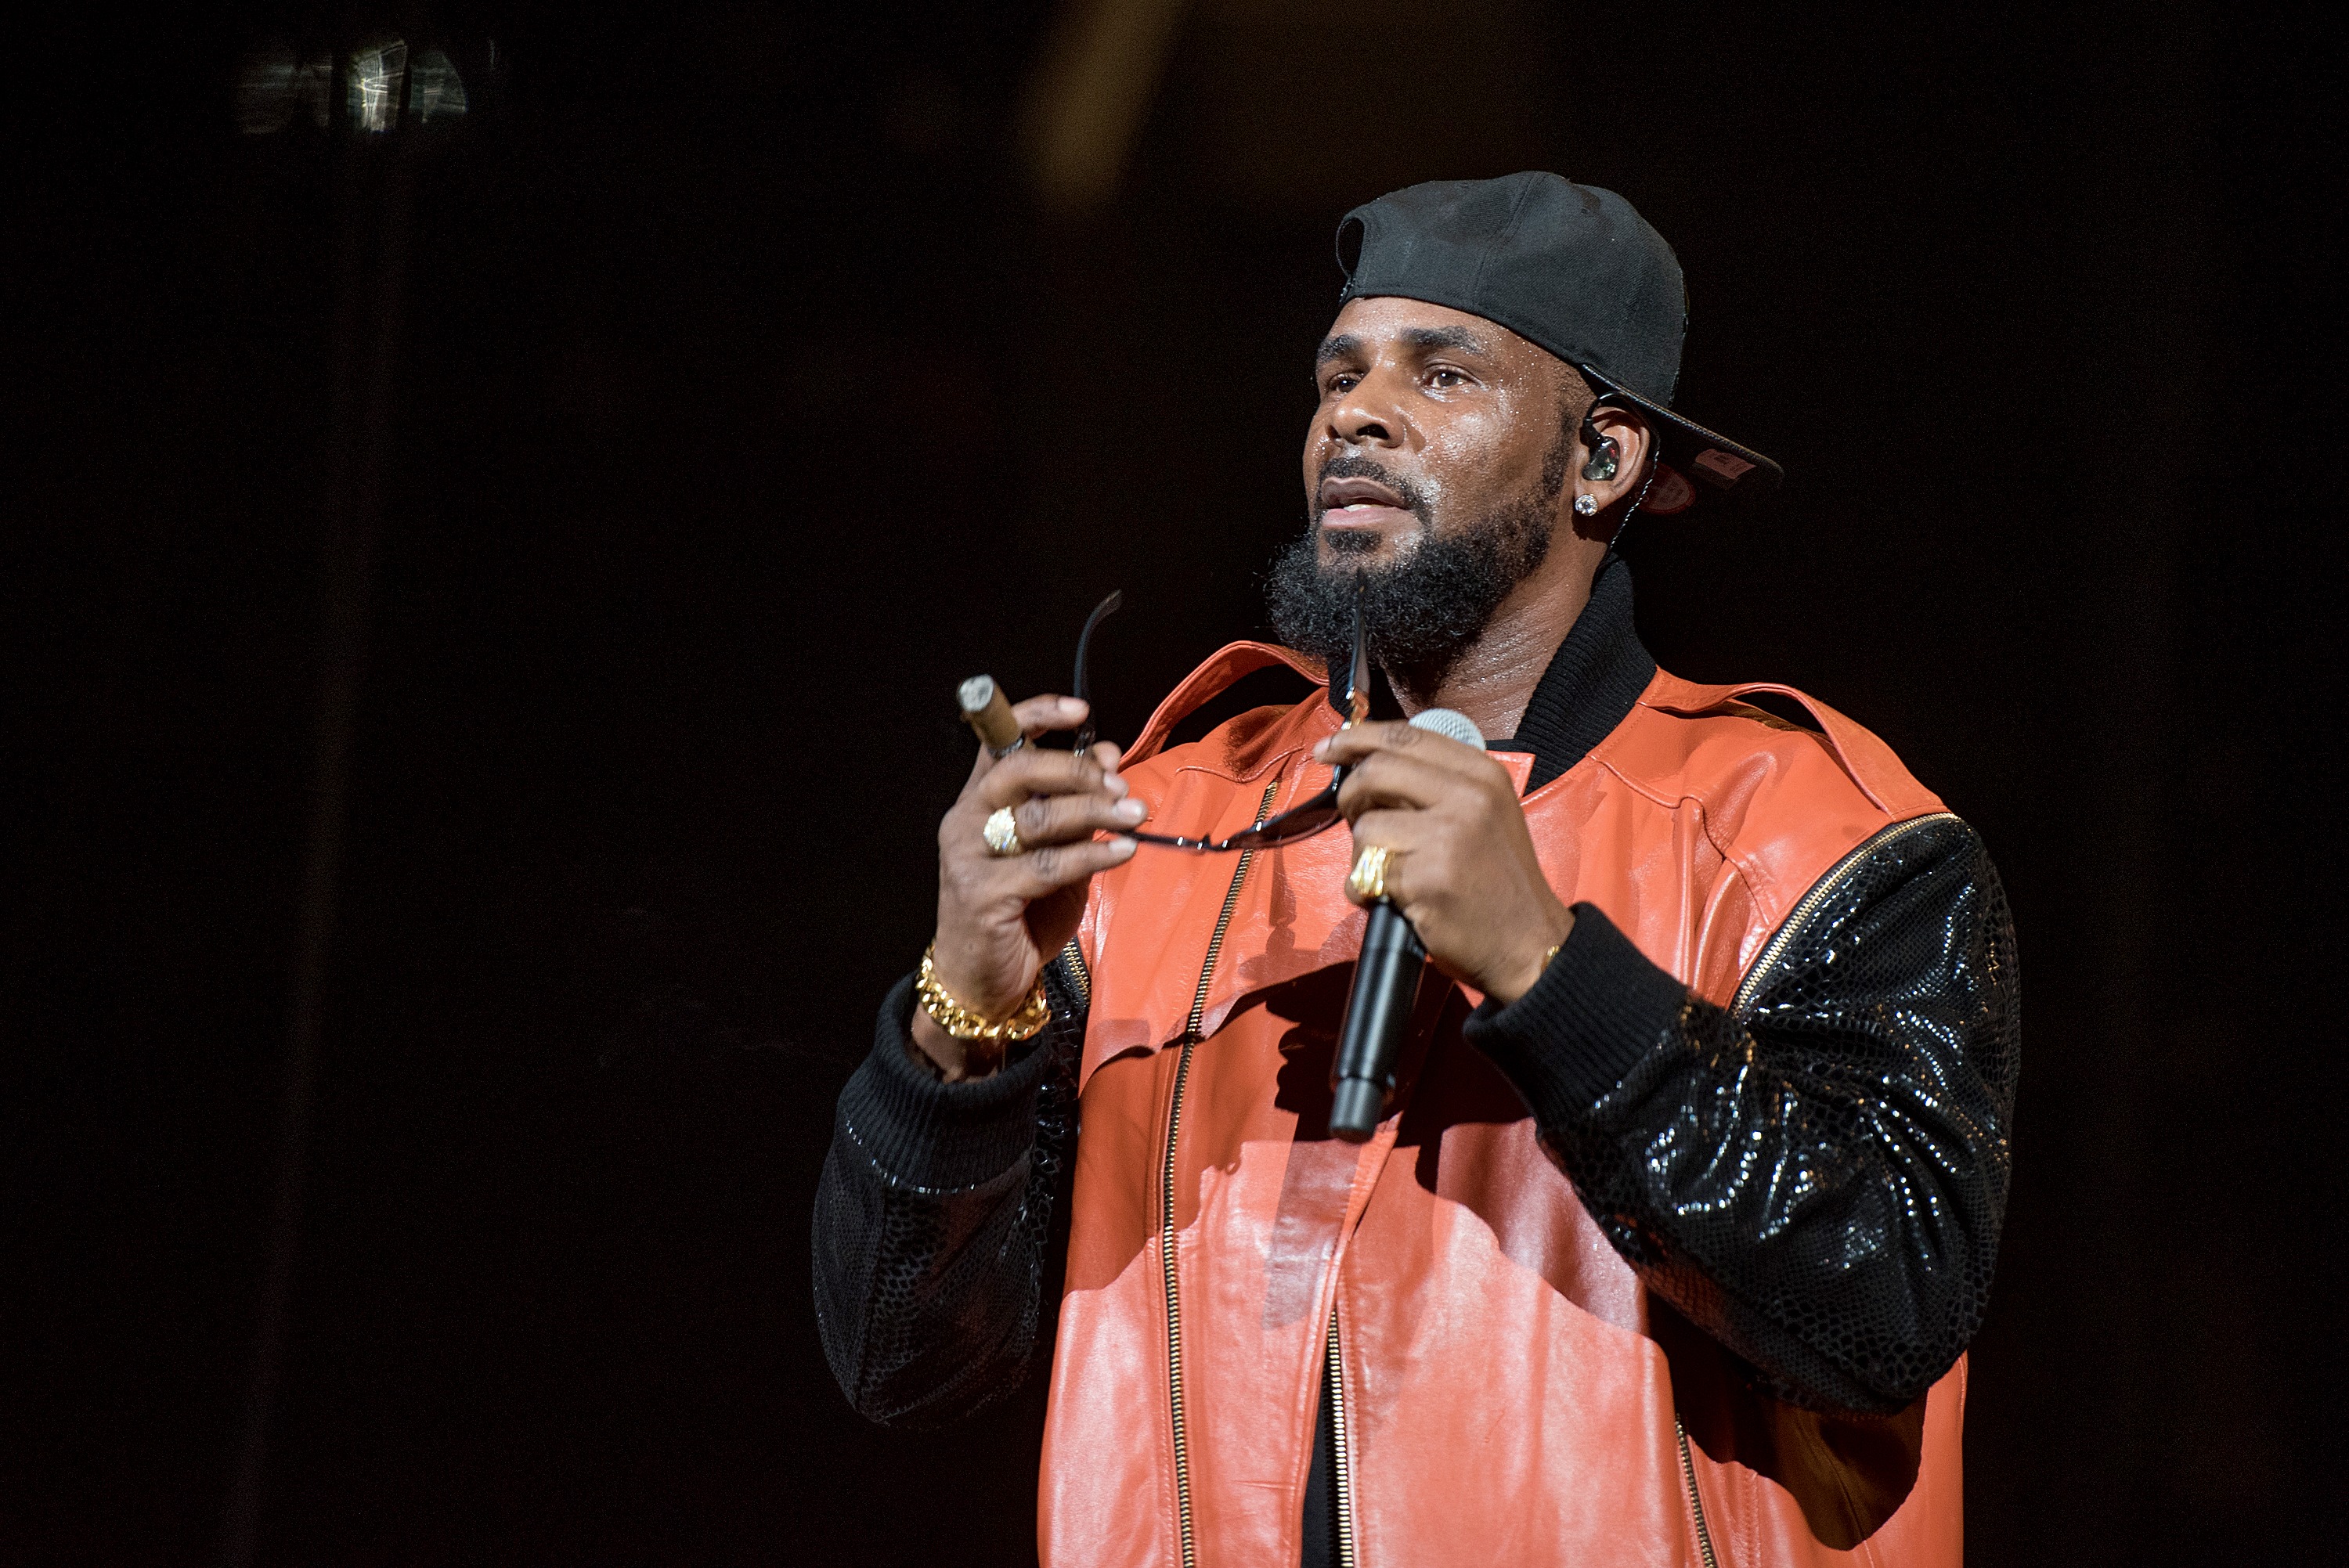 lifetime greenlights documentary series and movie on R Kelly abuse